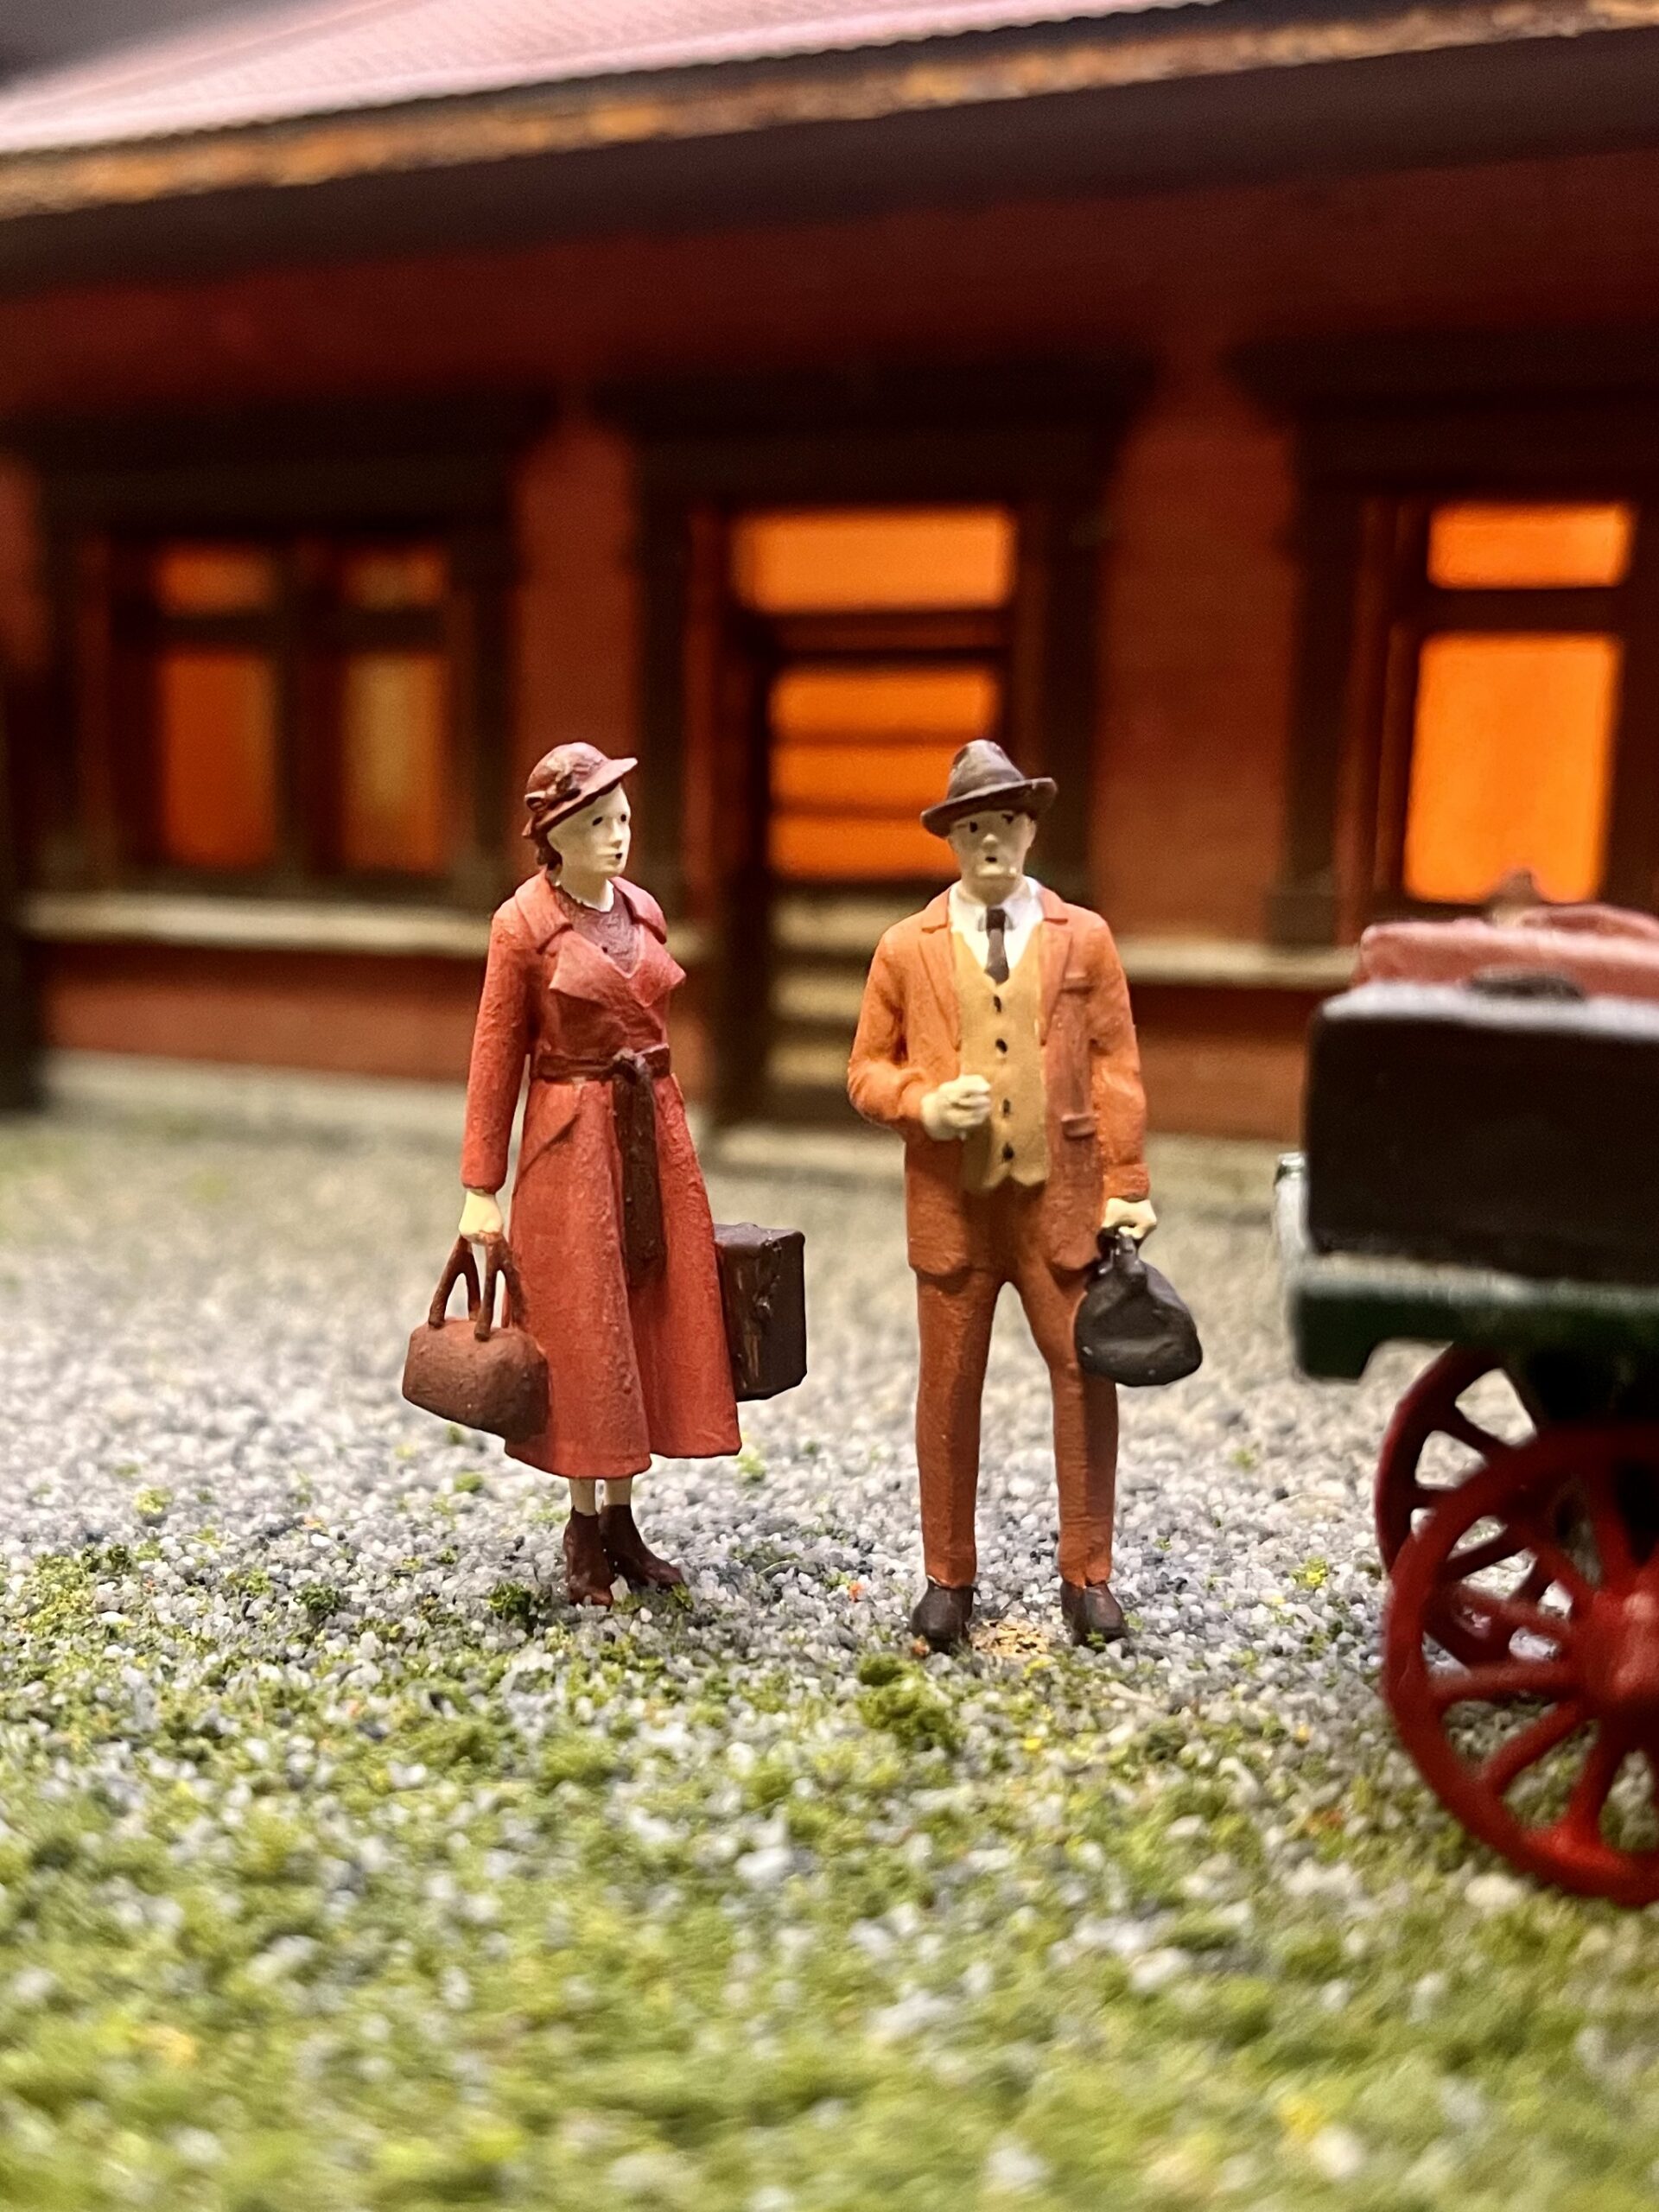 A photo of the miniature railroad people on display.